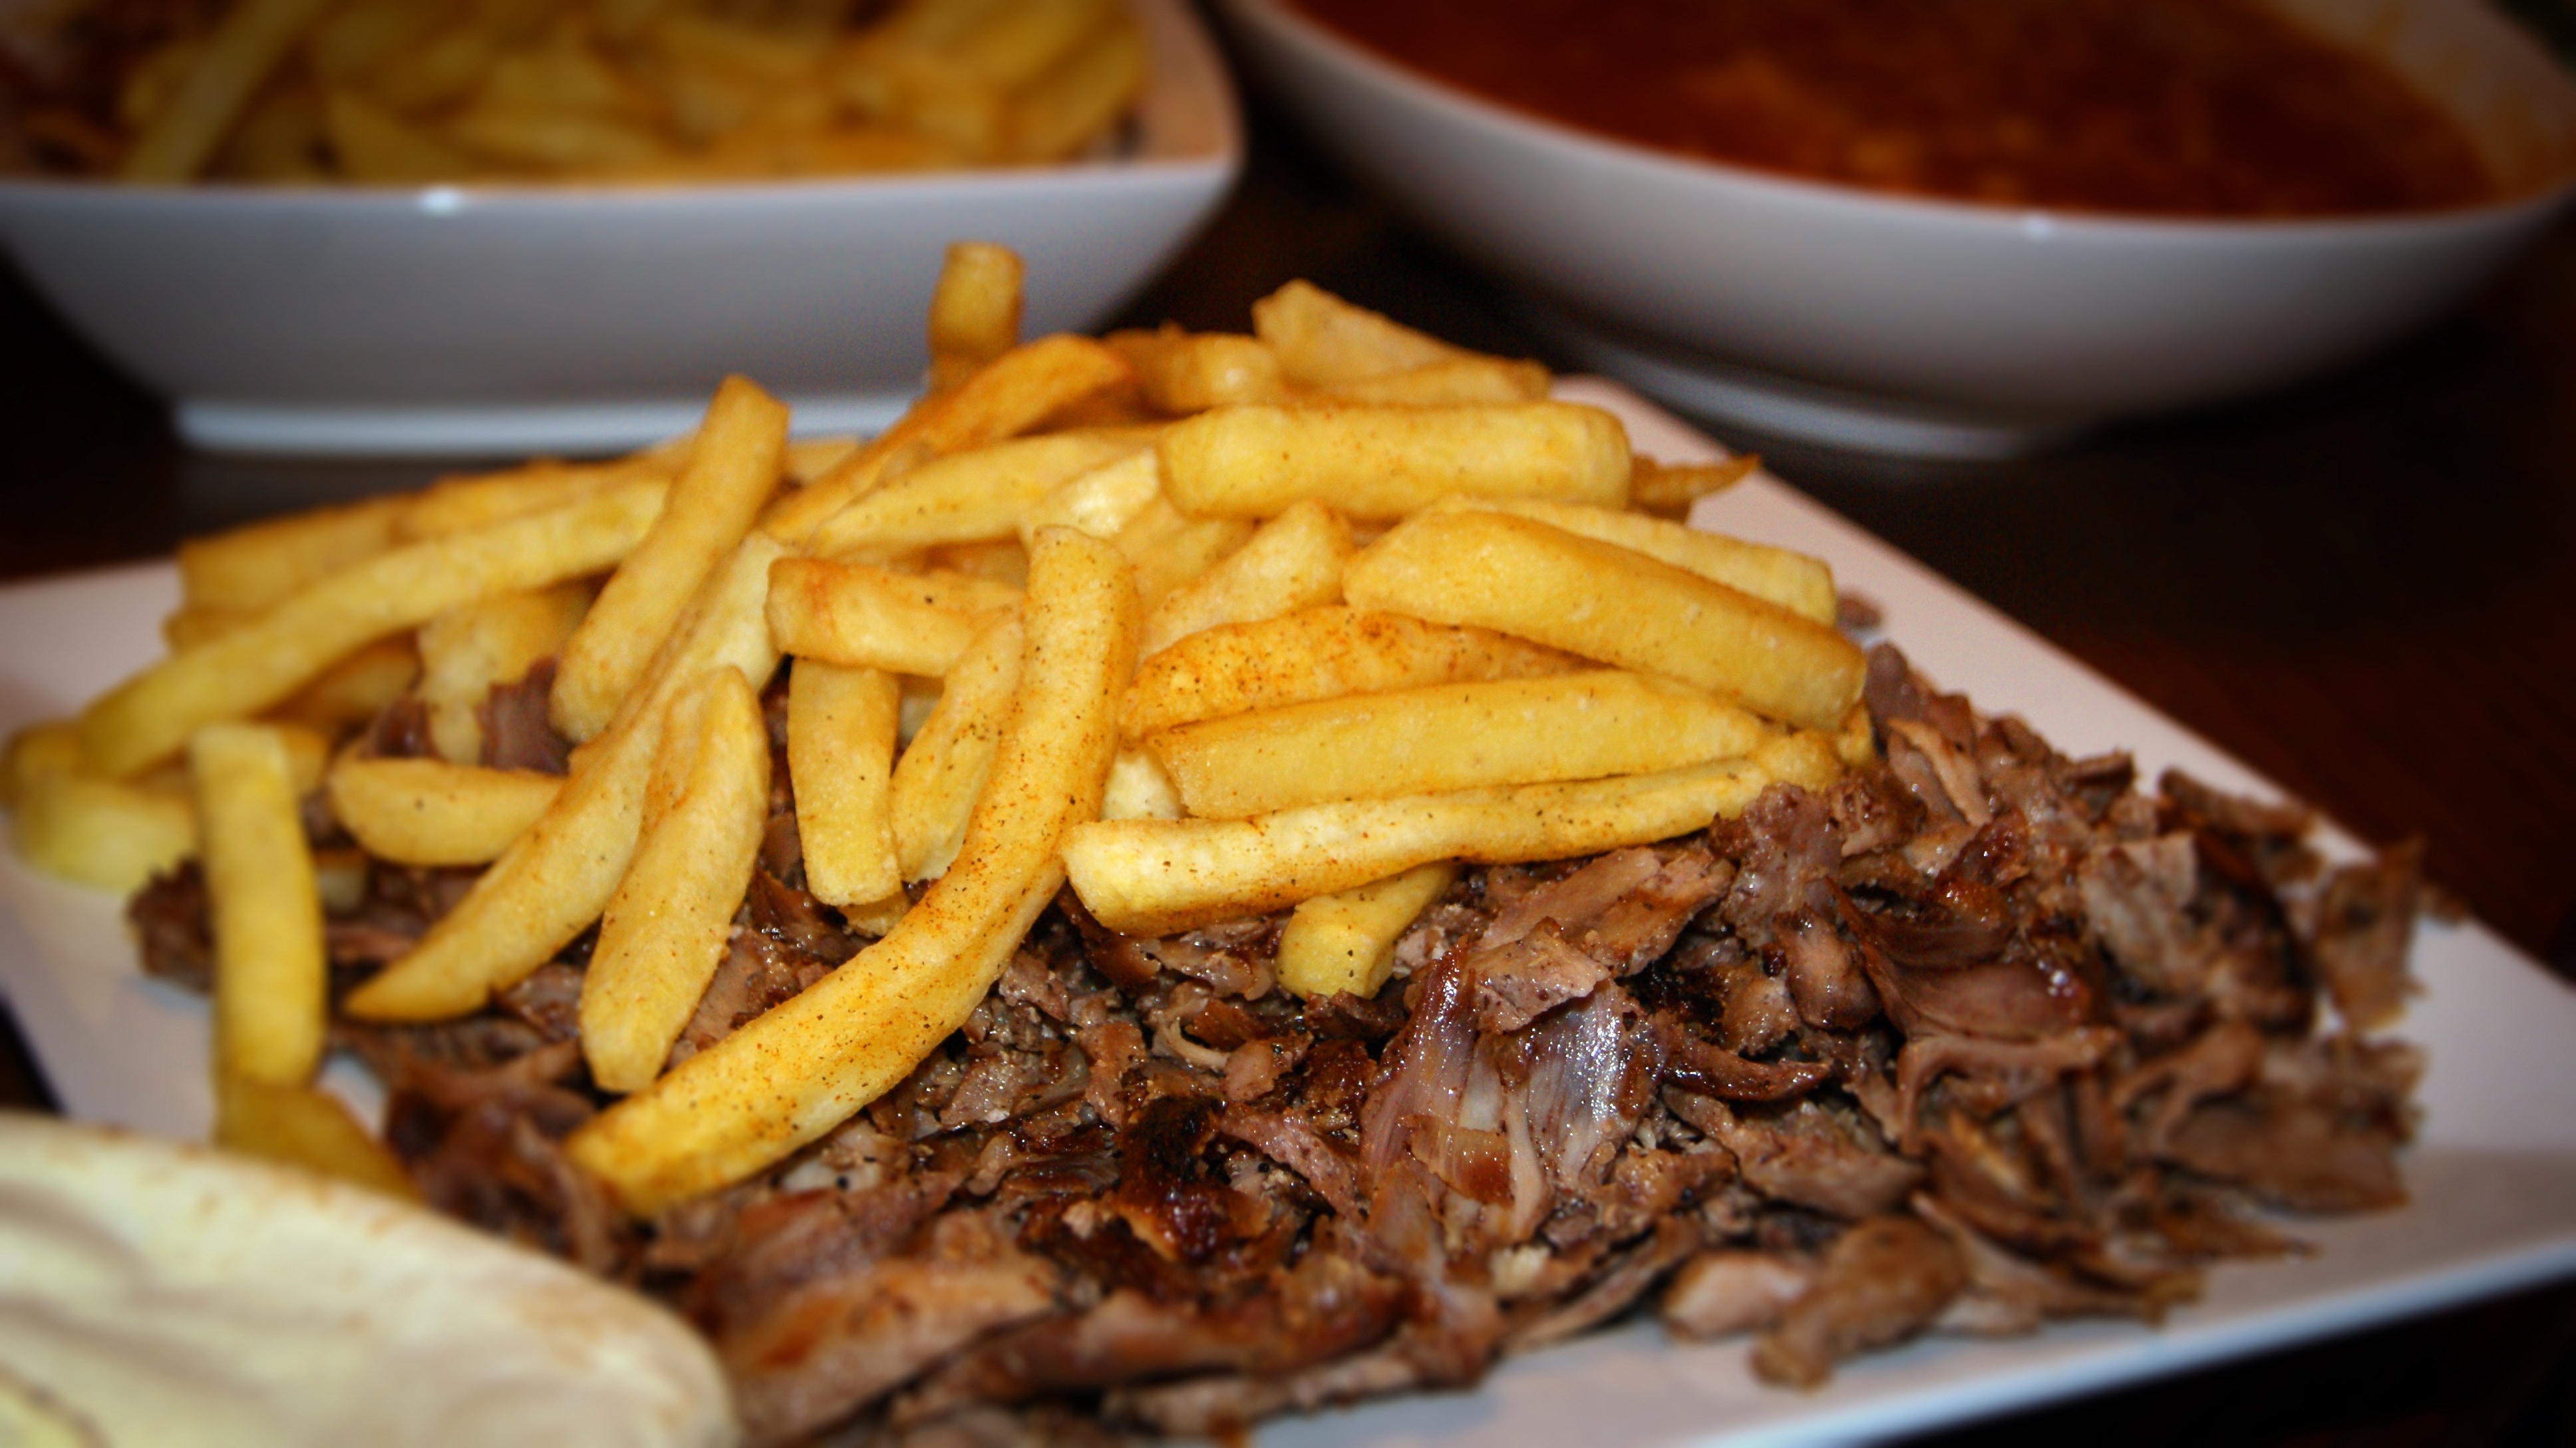 grilled meat with french fries